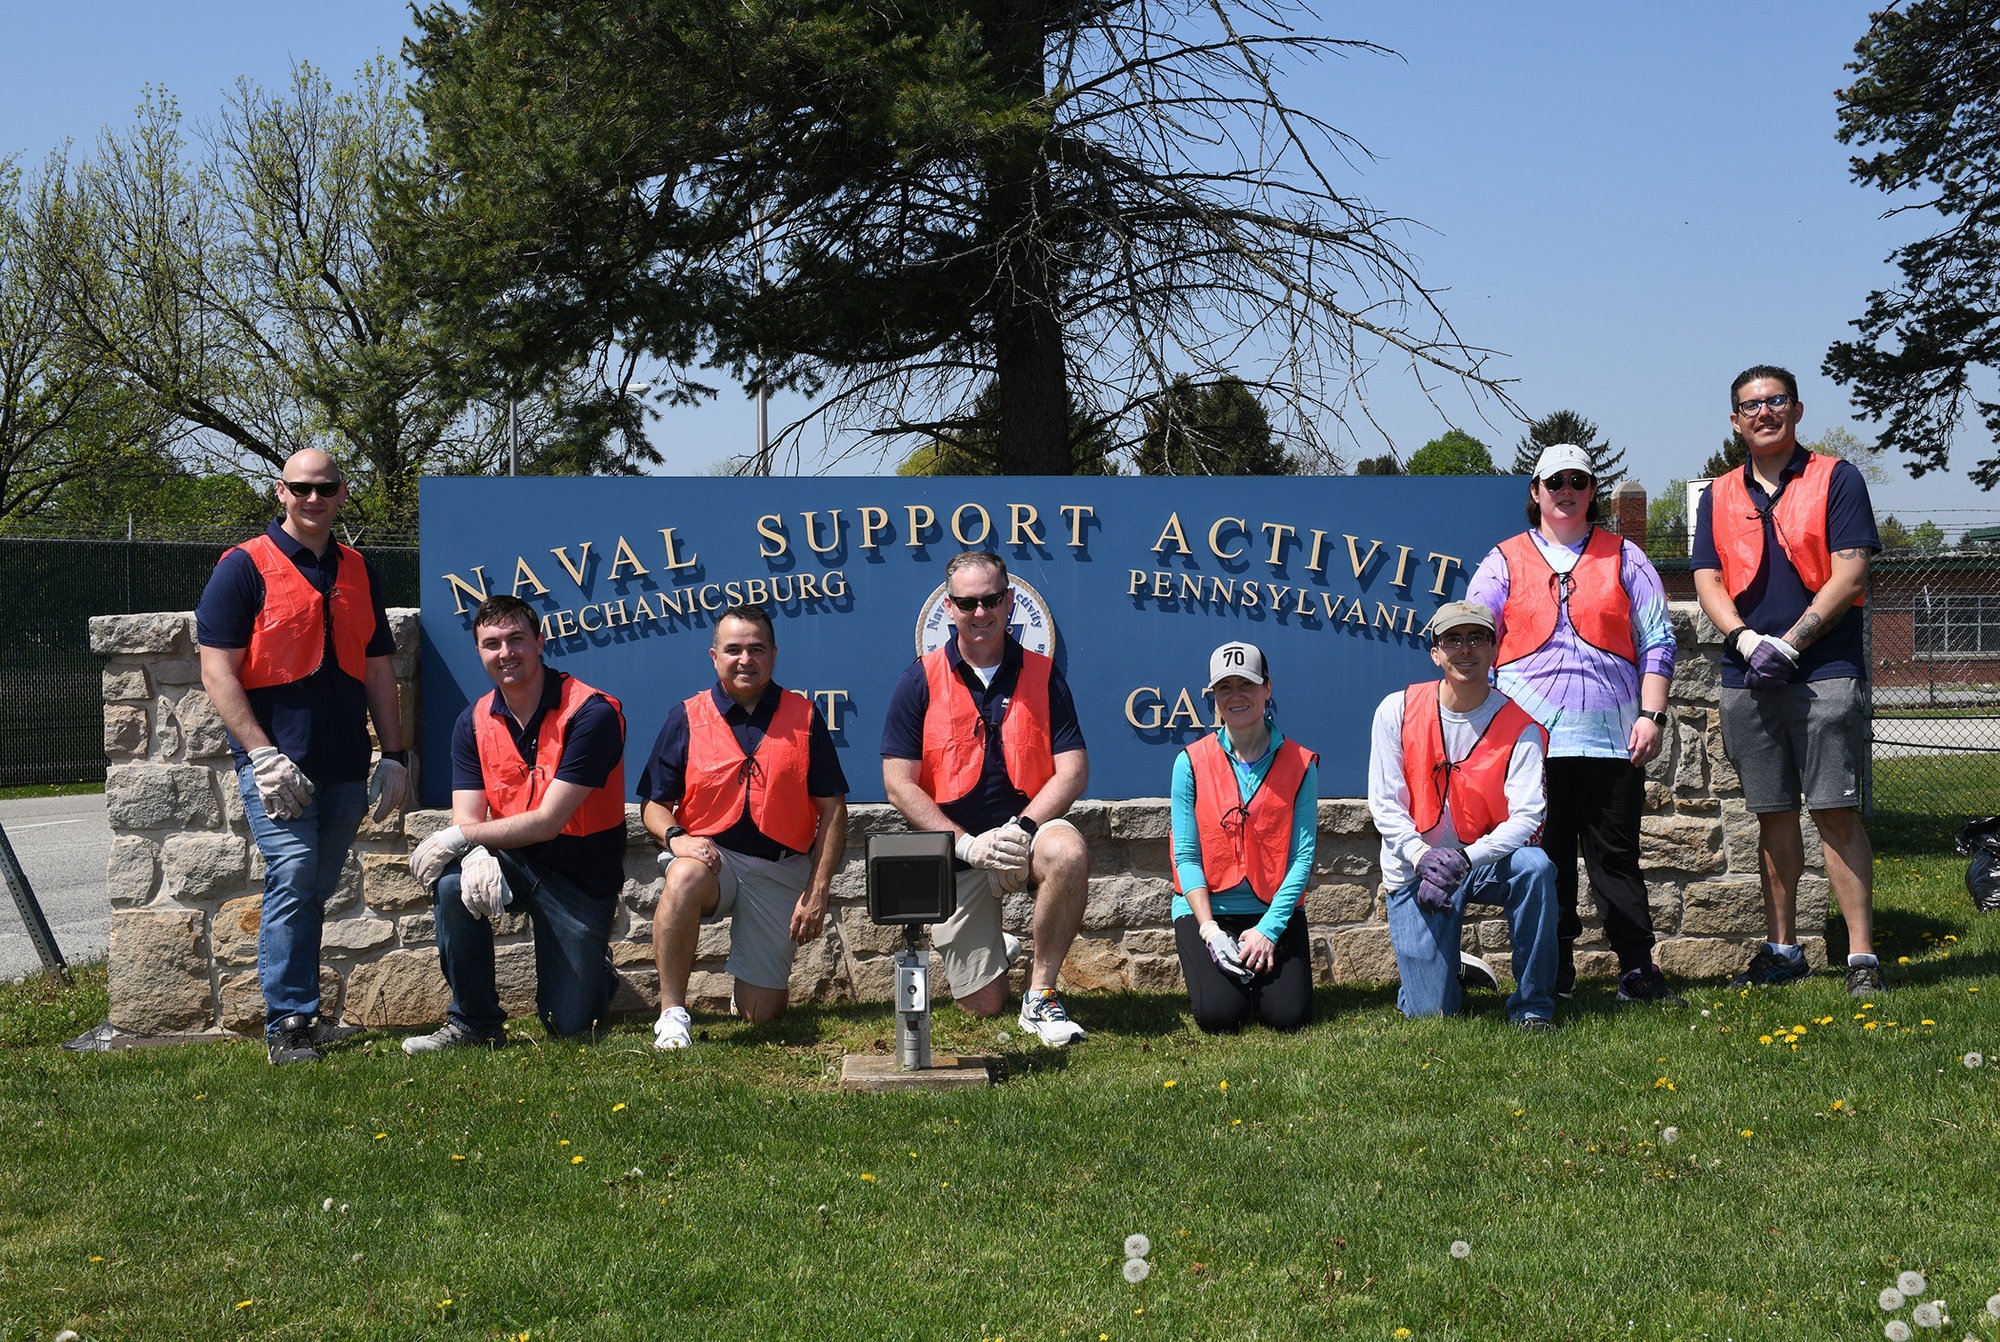 NAVSUP Business Systems Center Sailors Adopt A Highway, Keep Community  Clean > United States Navy > display-pressreleases